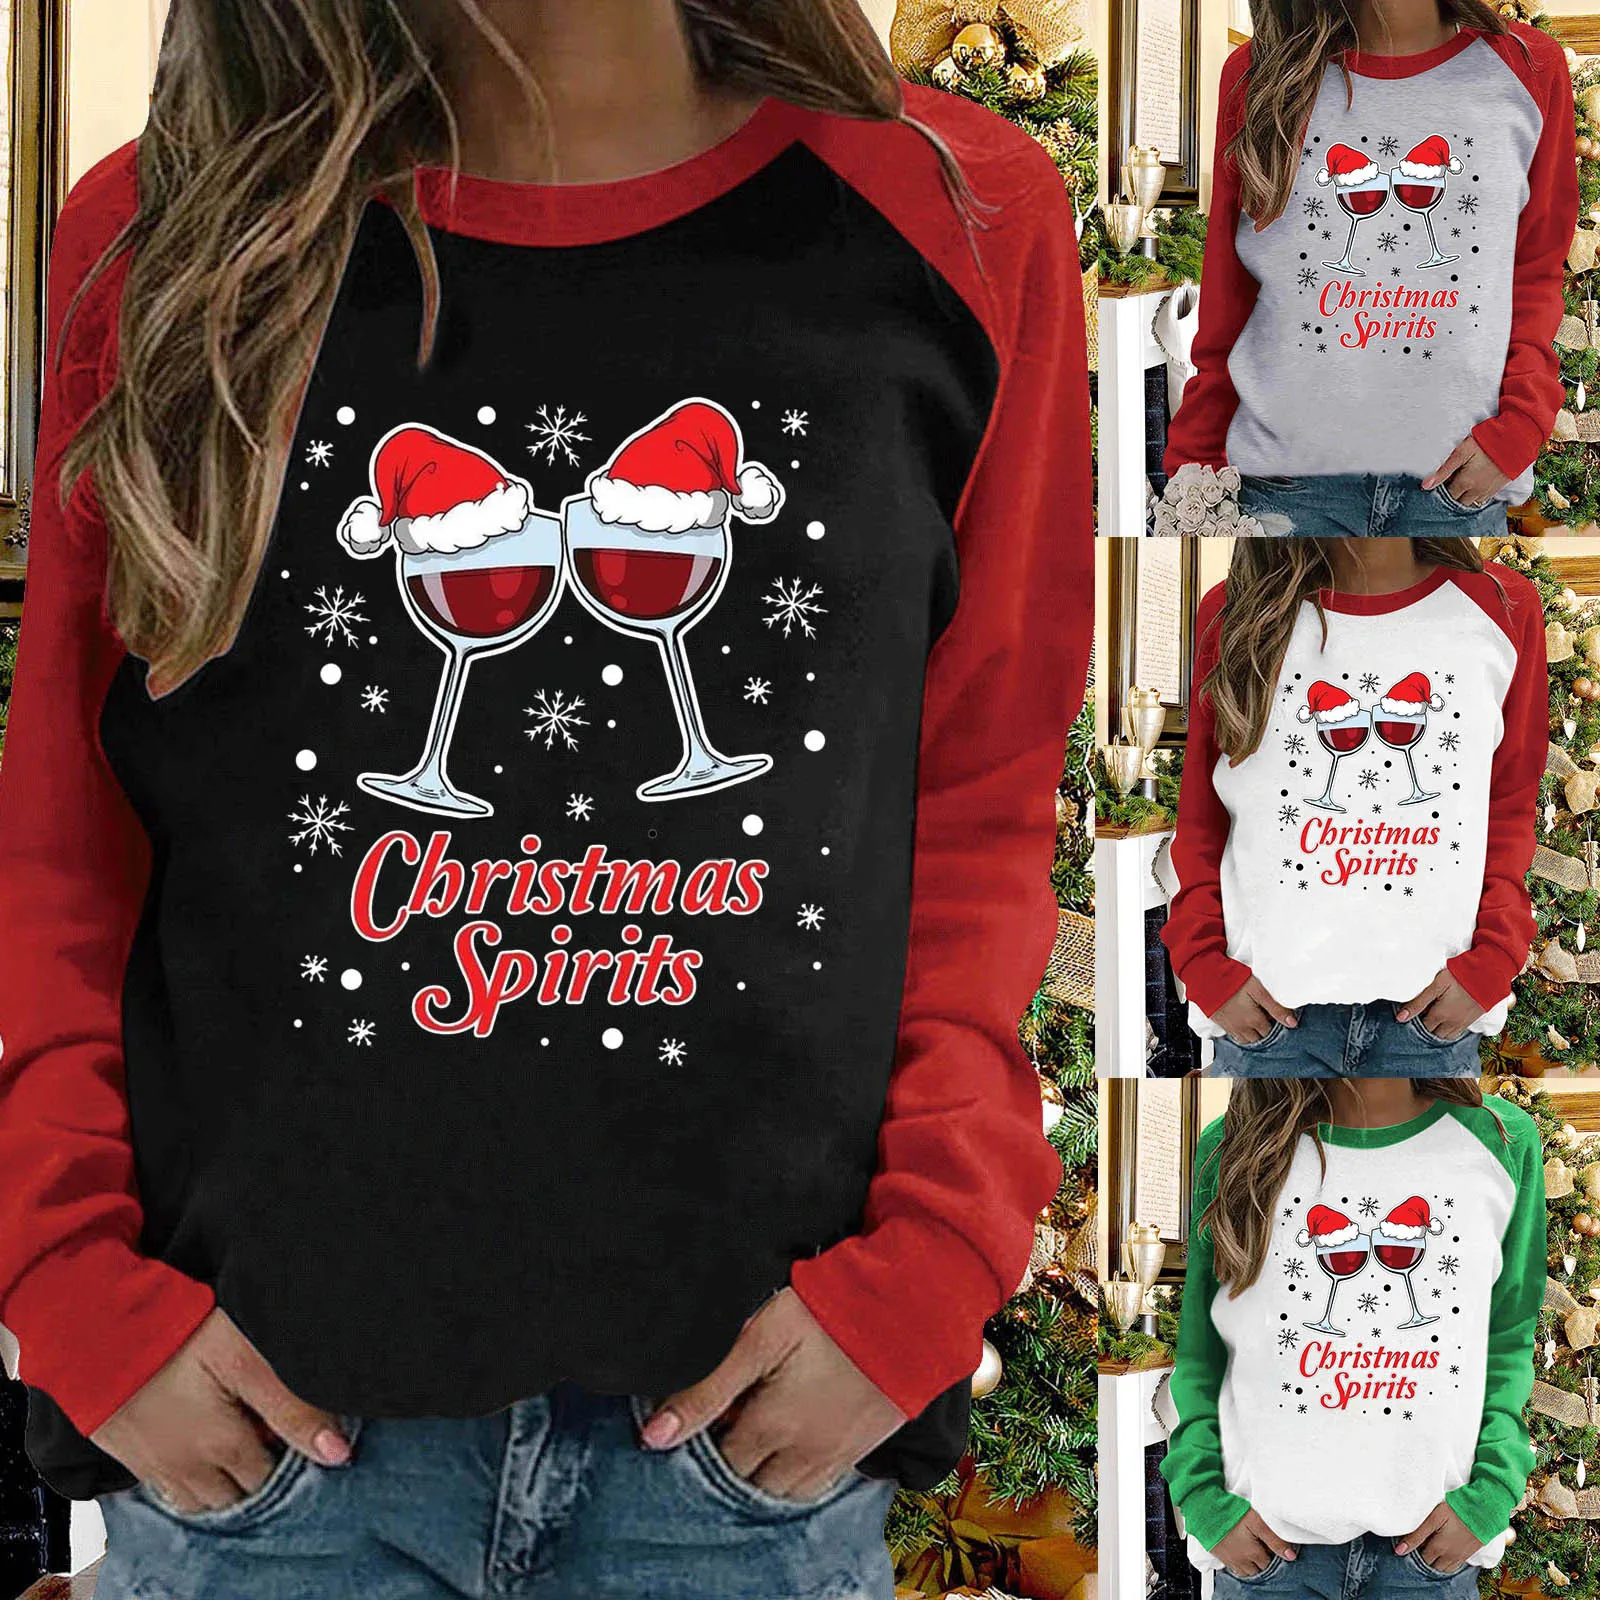 2022 New Autumn And Winter Women Splice Raglan T-Shirt Top New Sweater Christmas Wine Cup Print Round Neck Long Sleeve